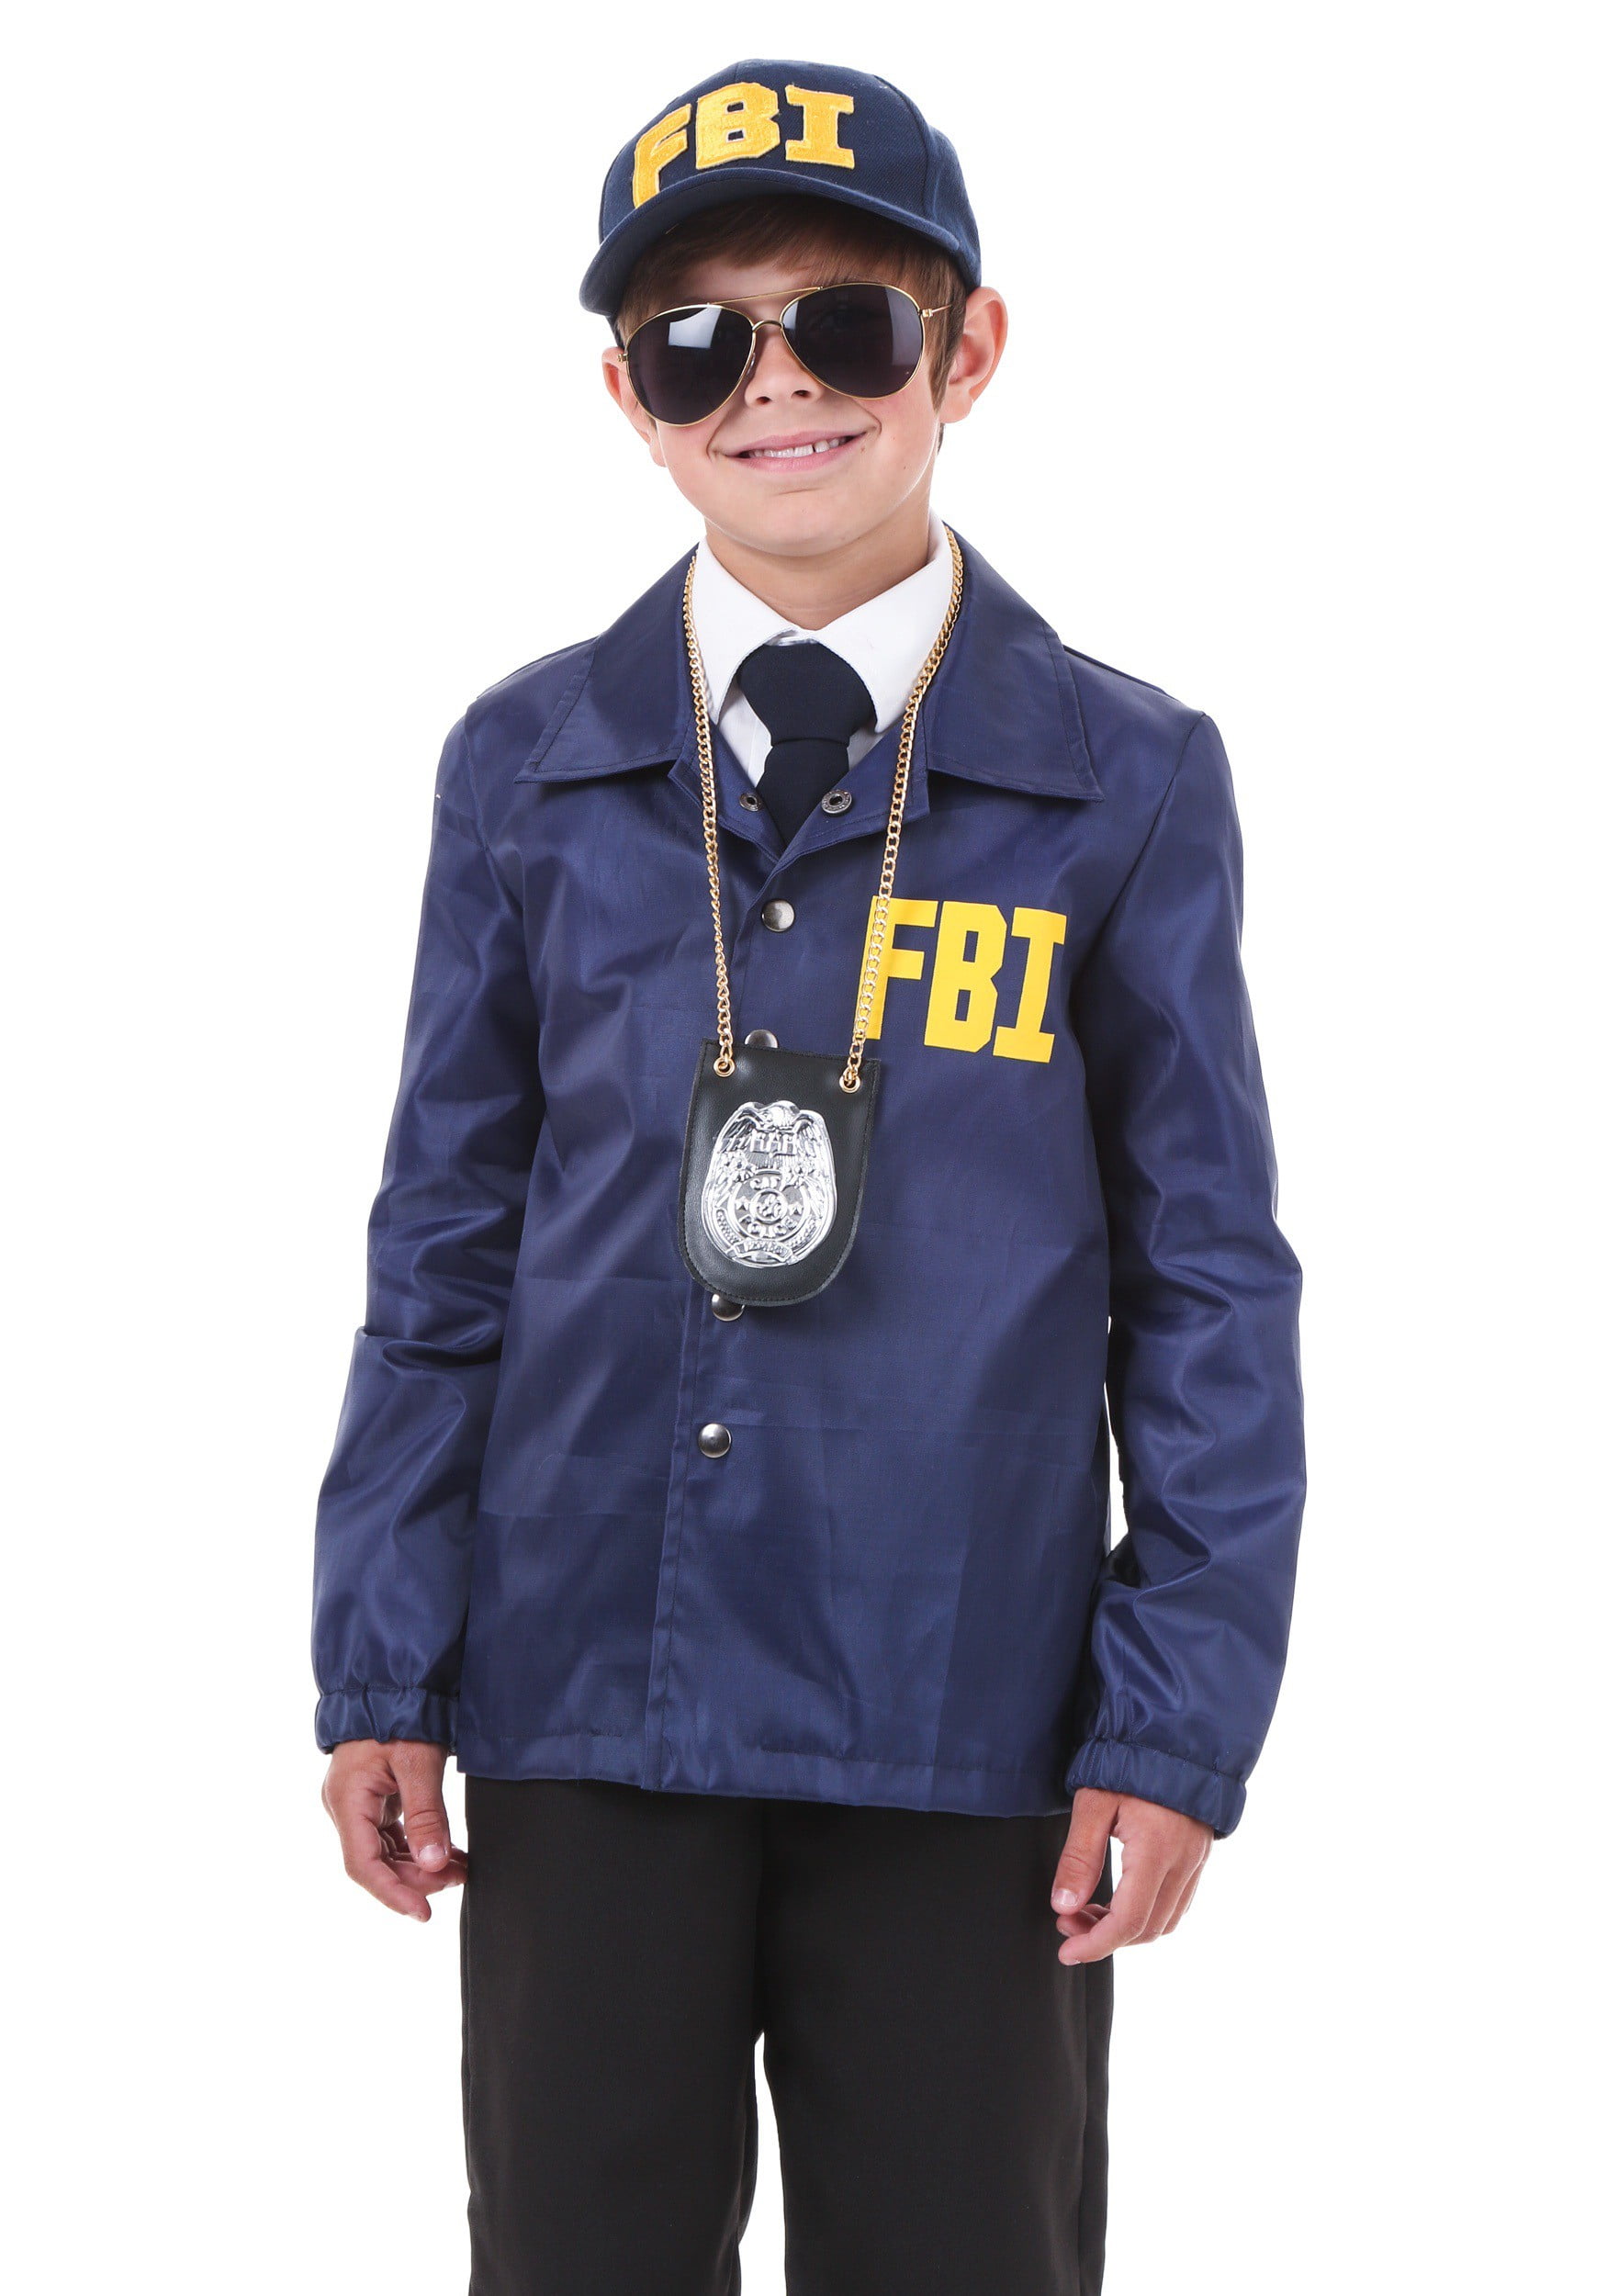 Personalize Your Kids Fbi Badge Toys With Fun Letters